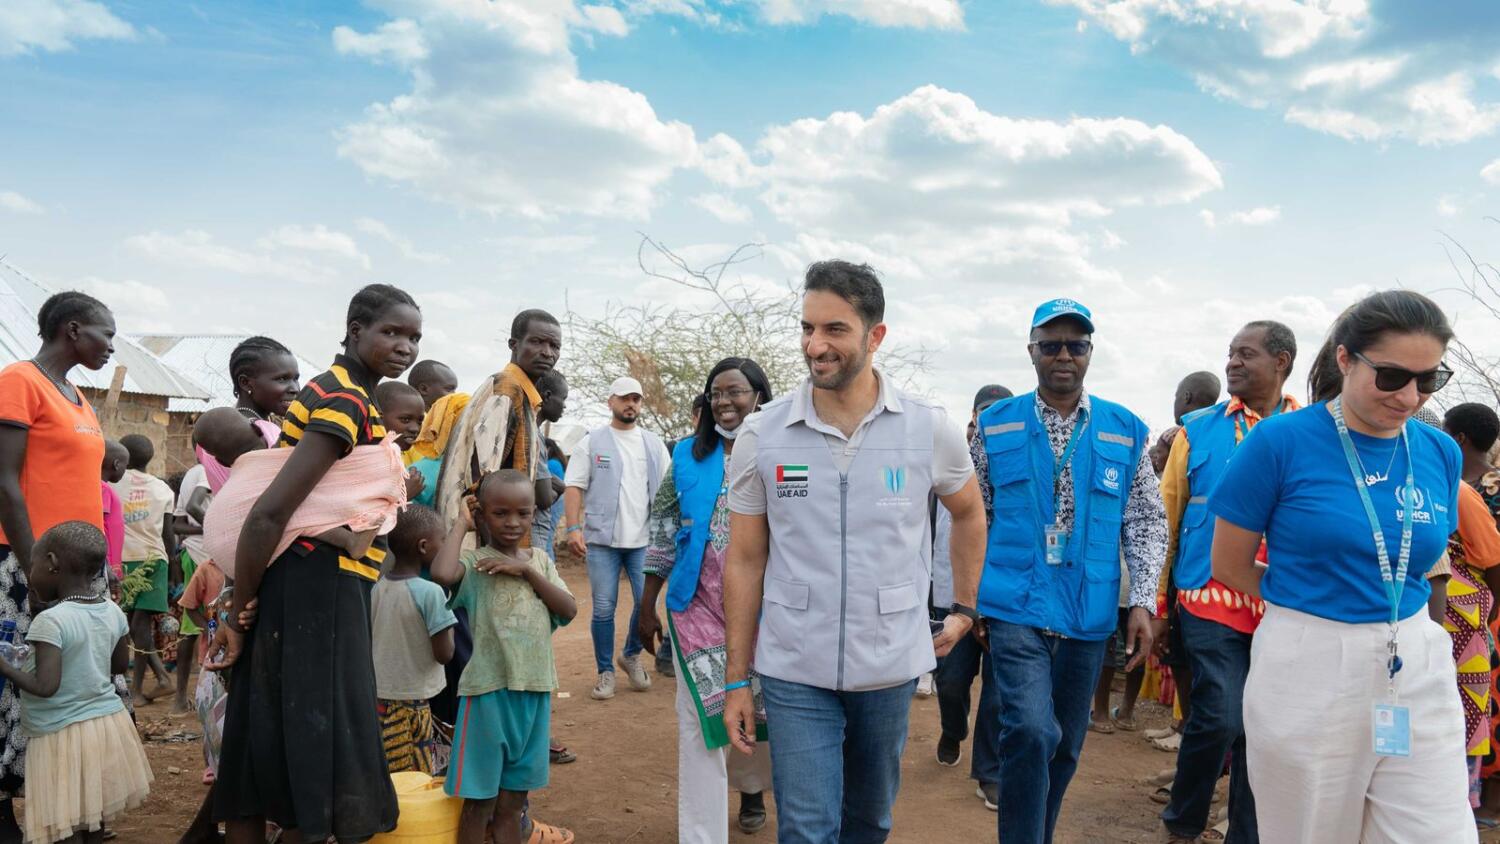 UAE Initiates Humanitarian Project 'Home for a Home' in Kenya